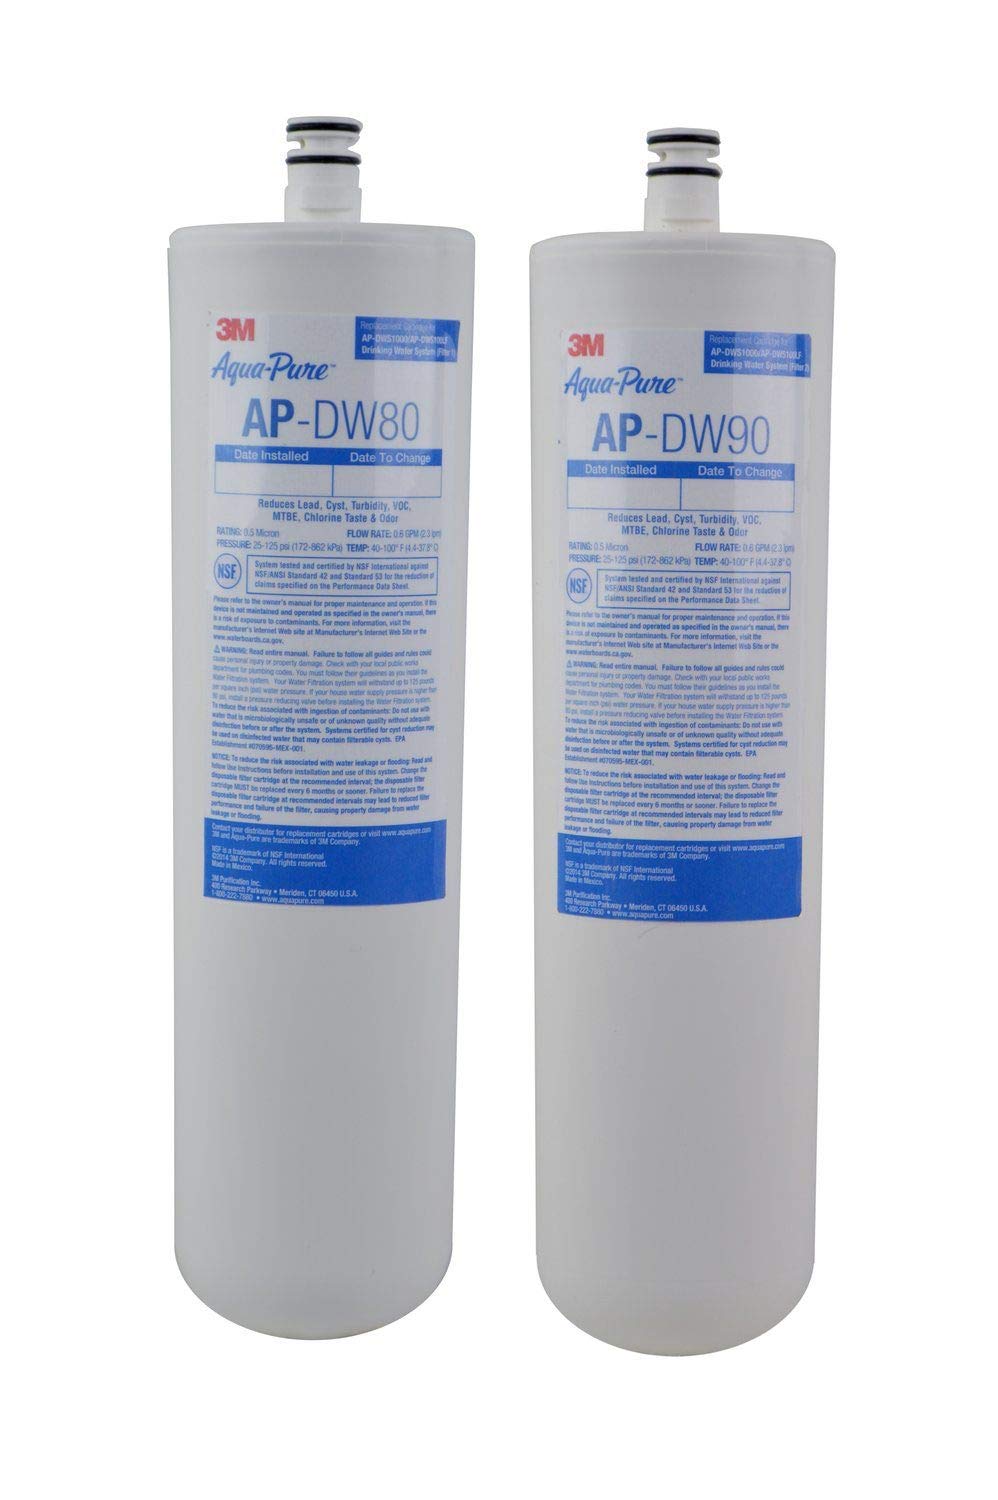  3M Aqua-Pure Whole House Replacement Water Filter AP810, For  Aqua-Pure AP801, AP801-C, AP801T and AP801B Water Filtration Systems,White  : Tools & Home Improvement